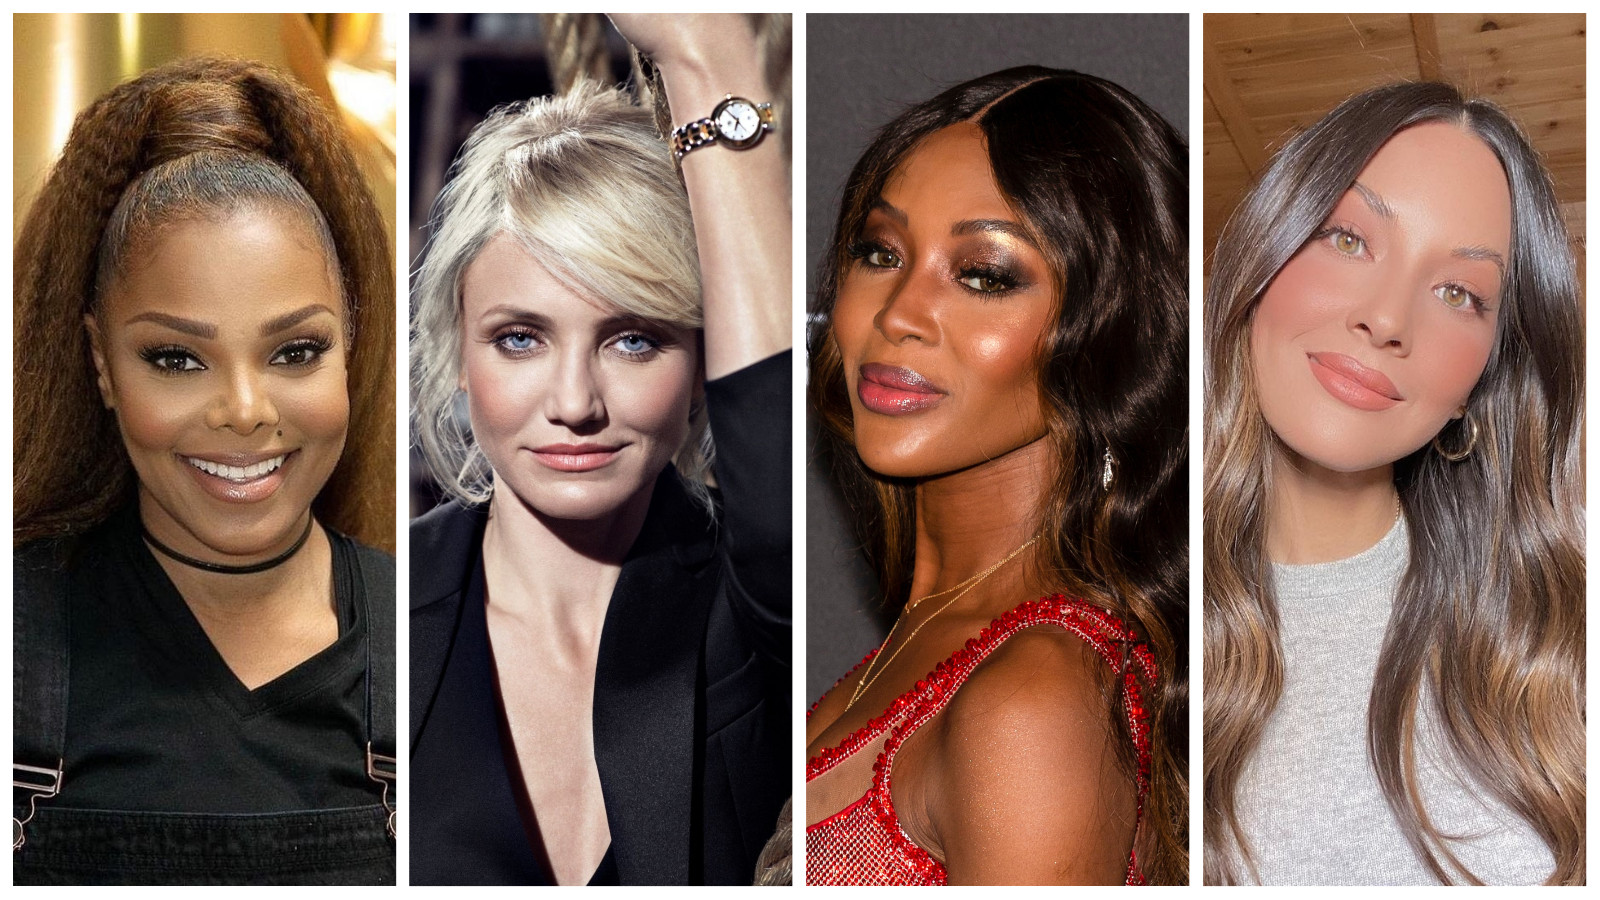 Meet these celebrities who became mums after age 40, including Janet Jackson, Cameron Diaz, Naomi Campbell and Olivia Munn. Photos: @janetjackson, @oliviamunn/Instagram; Tag Heuer; Shutterstock